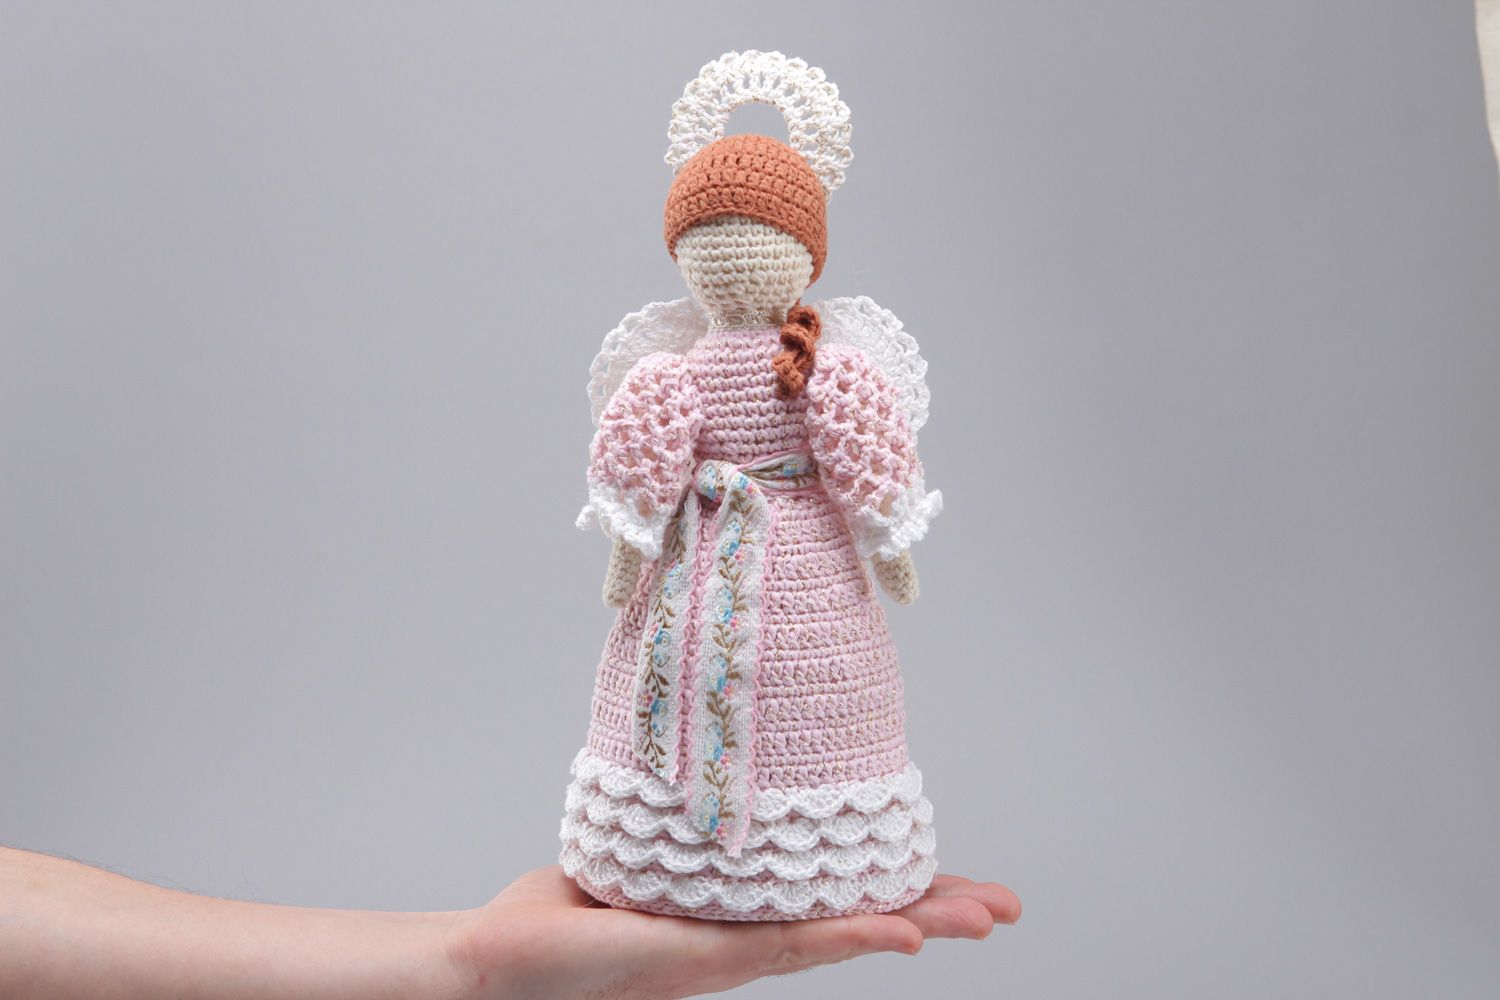 Handmade soft toy angel crocheted of cotton threads for kids and interior decor photo 4